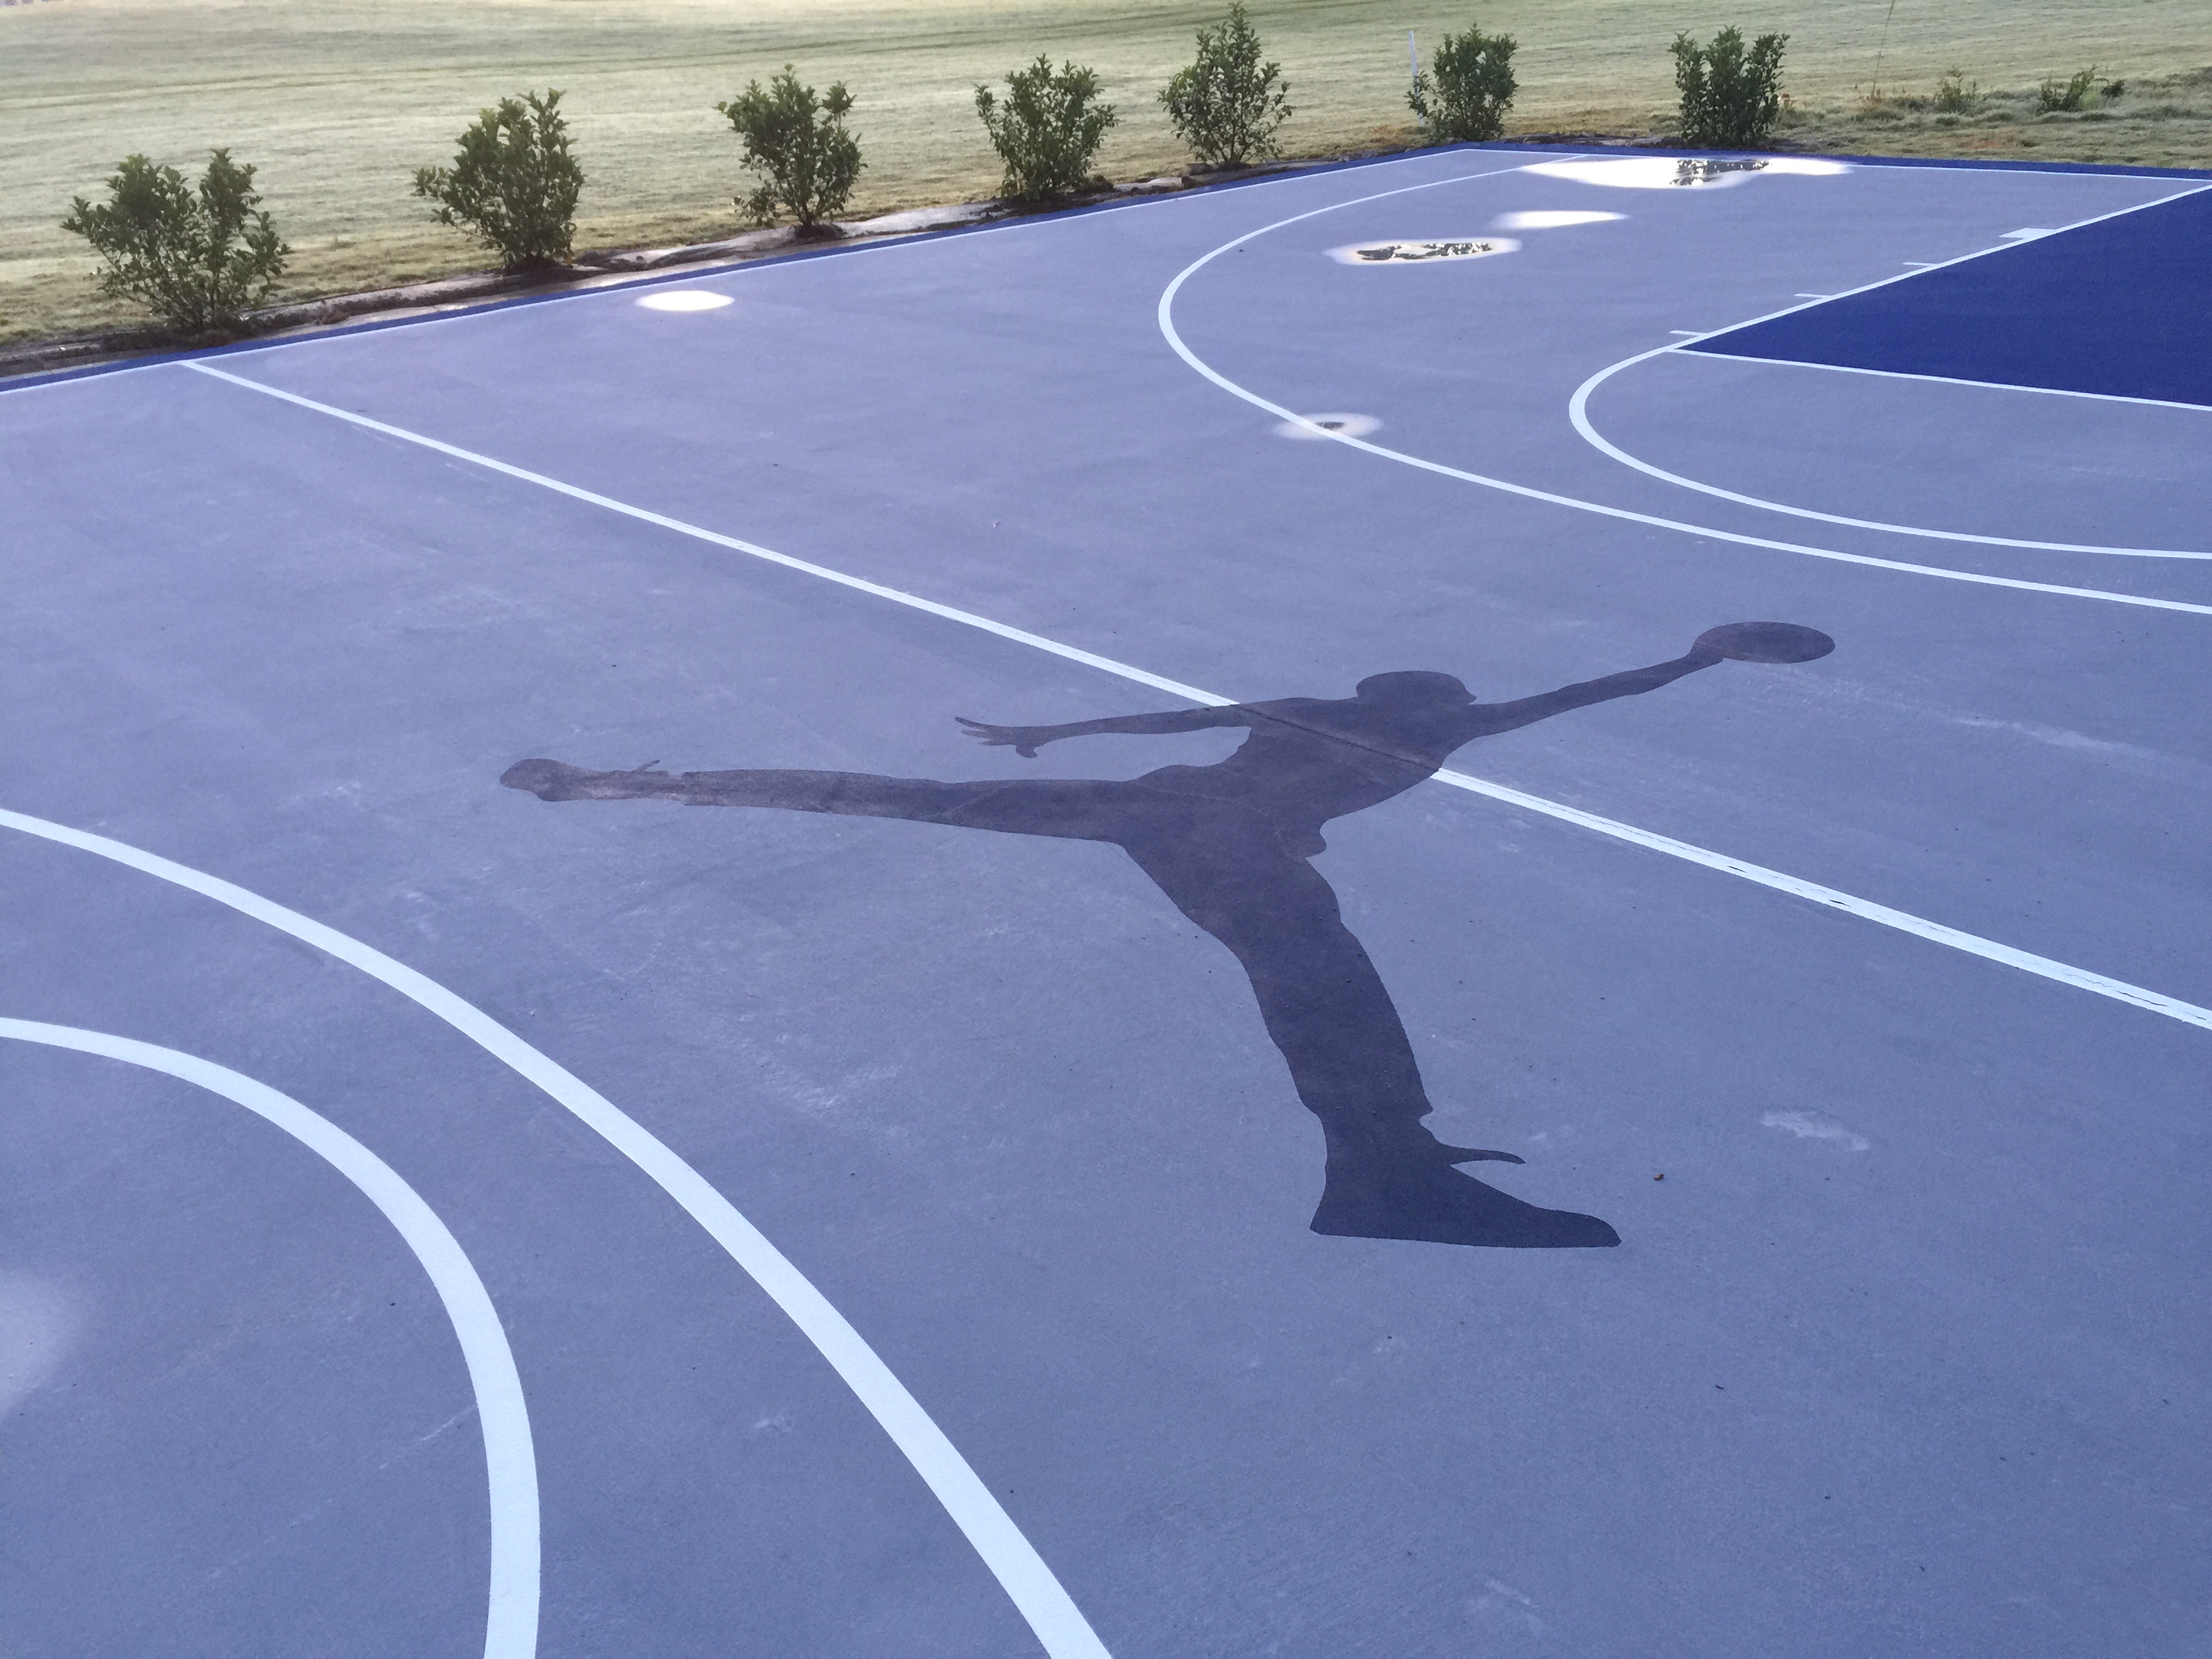 Grey and blue court with "jump man" logo